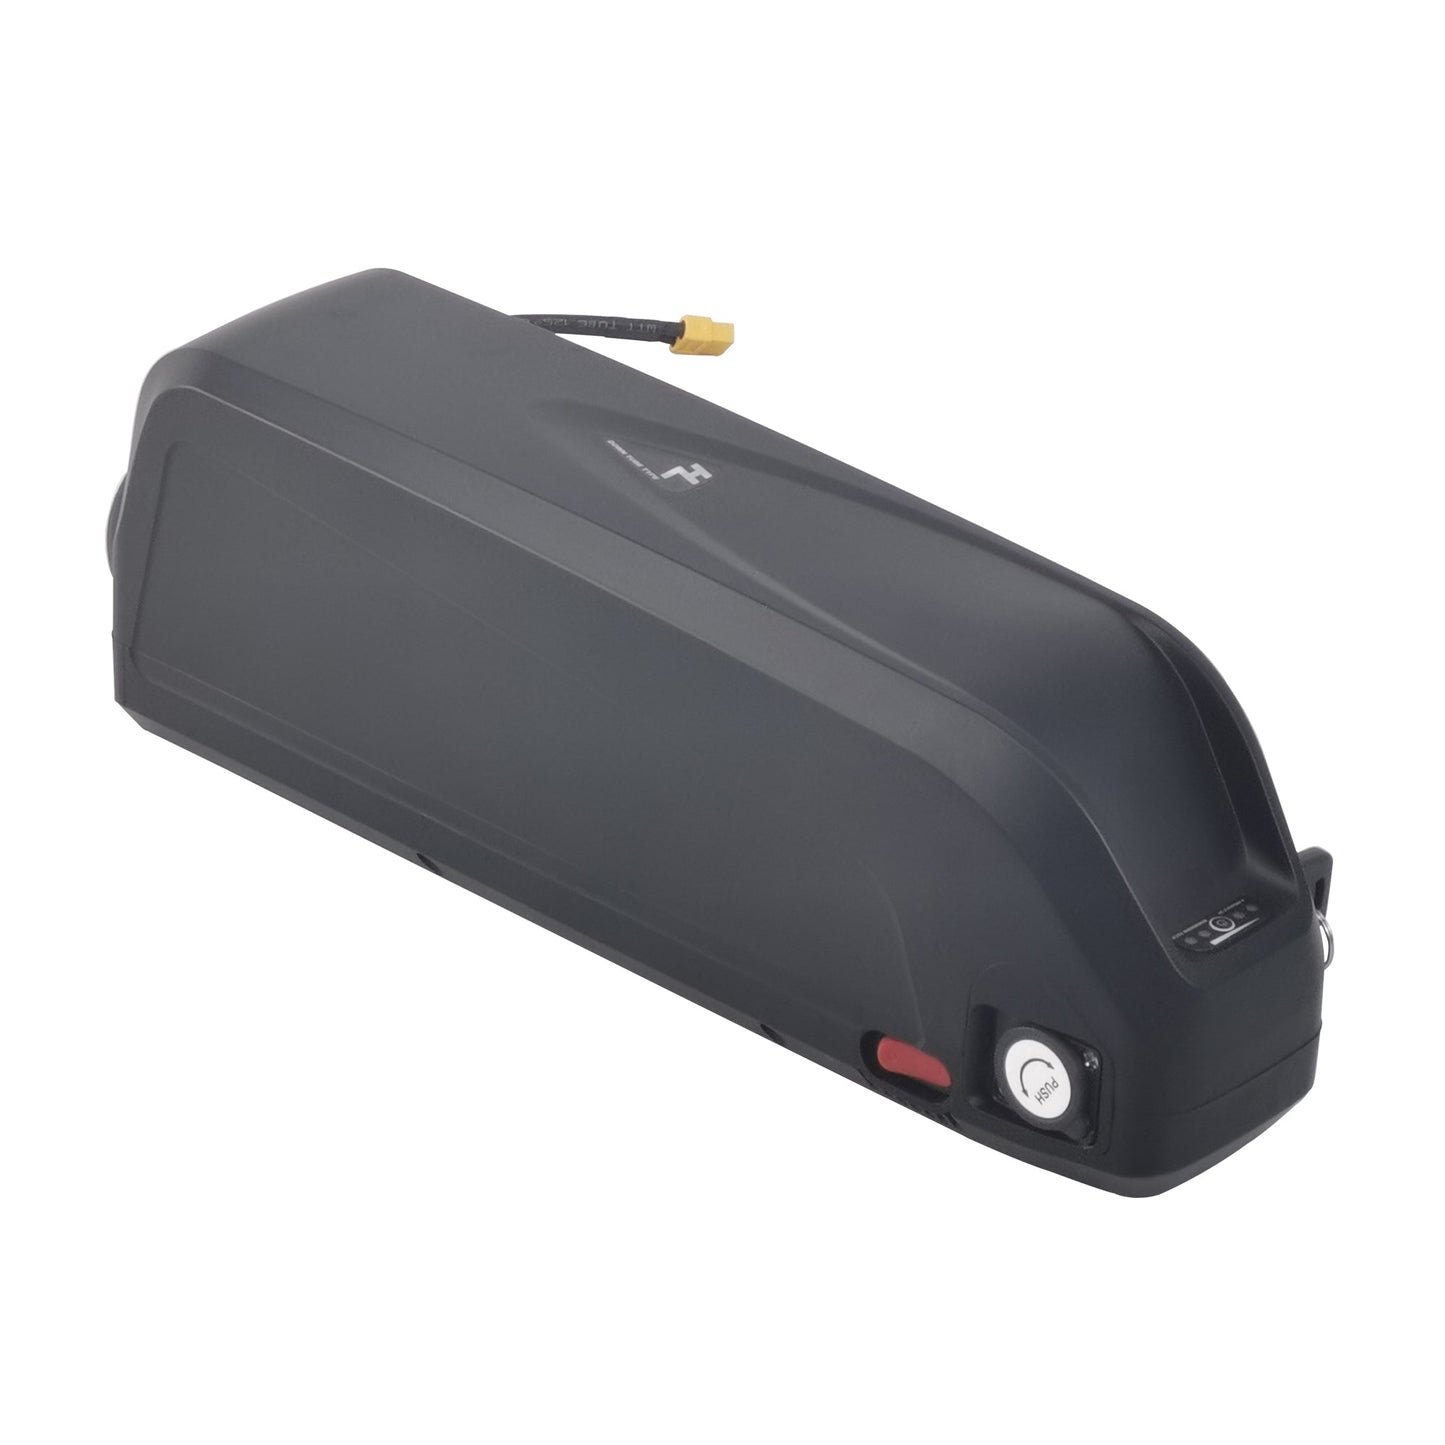 Spain stock 52V20Ah  Hailong ebike battery 21700 A grade cell 50A BMS support 2000W motor included 4A charger